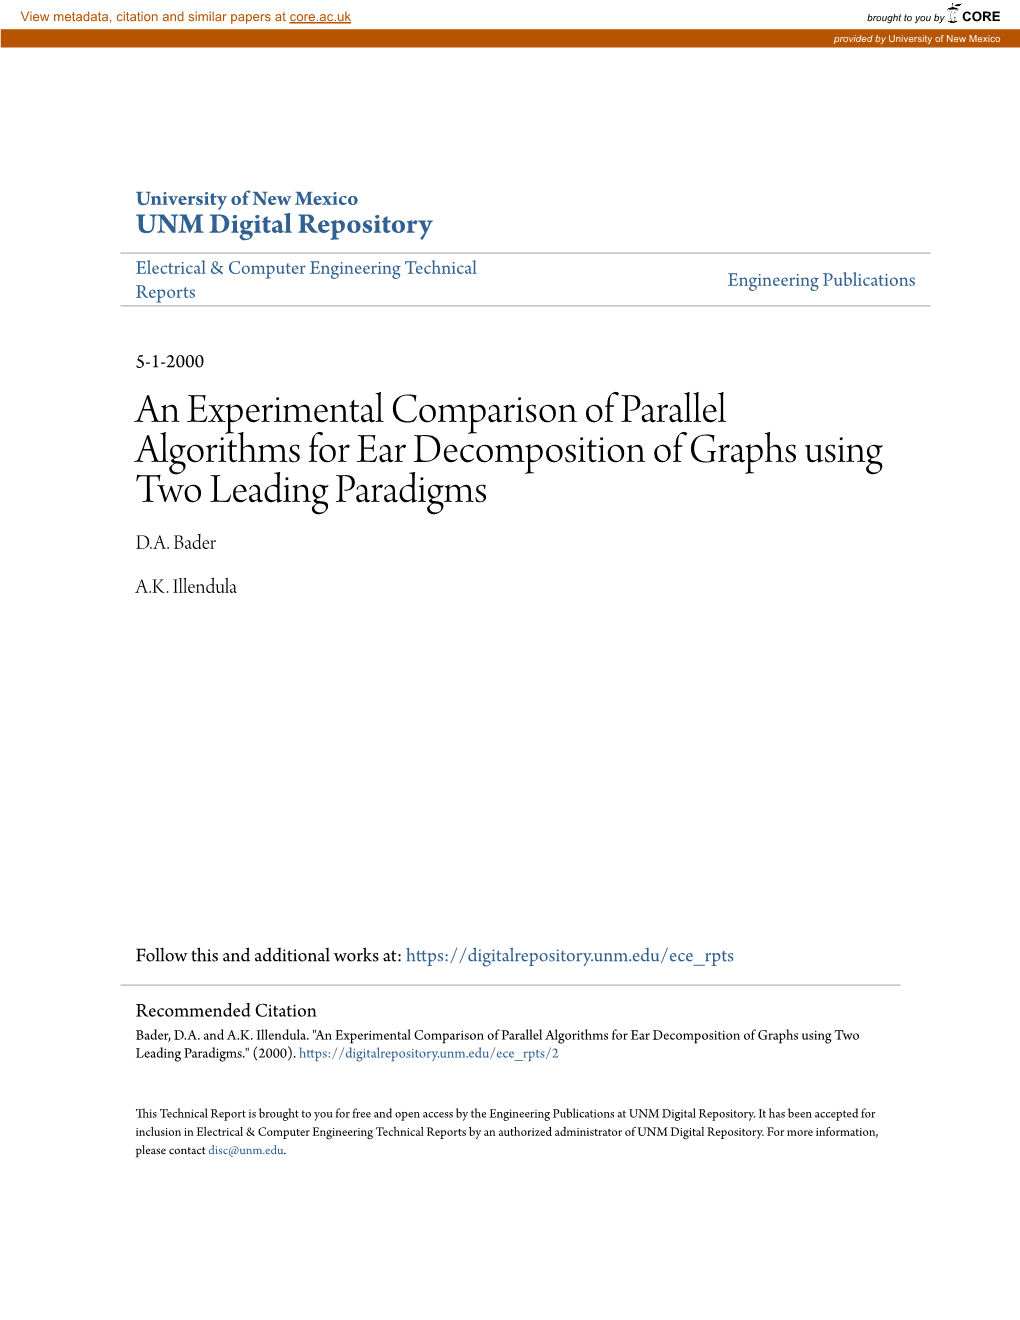 An Experimental Comparison of Parallel Algorithms for Ear Decomposition of Graphs Using Two Leading Paradigms D.A